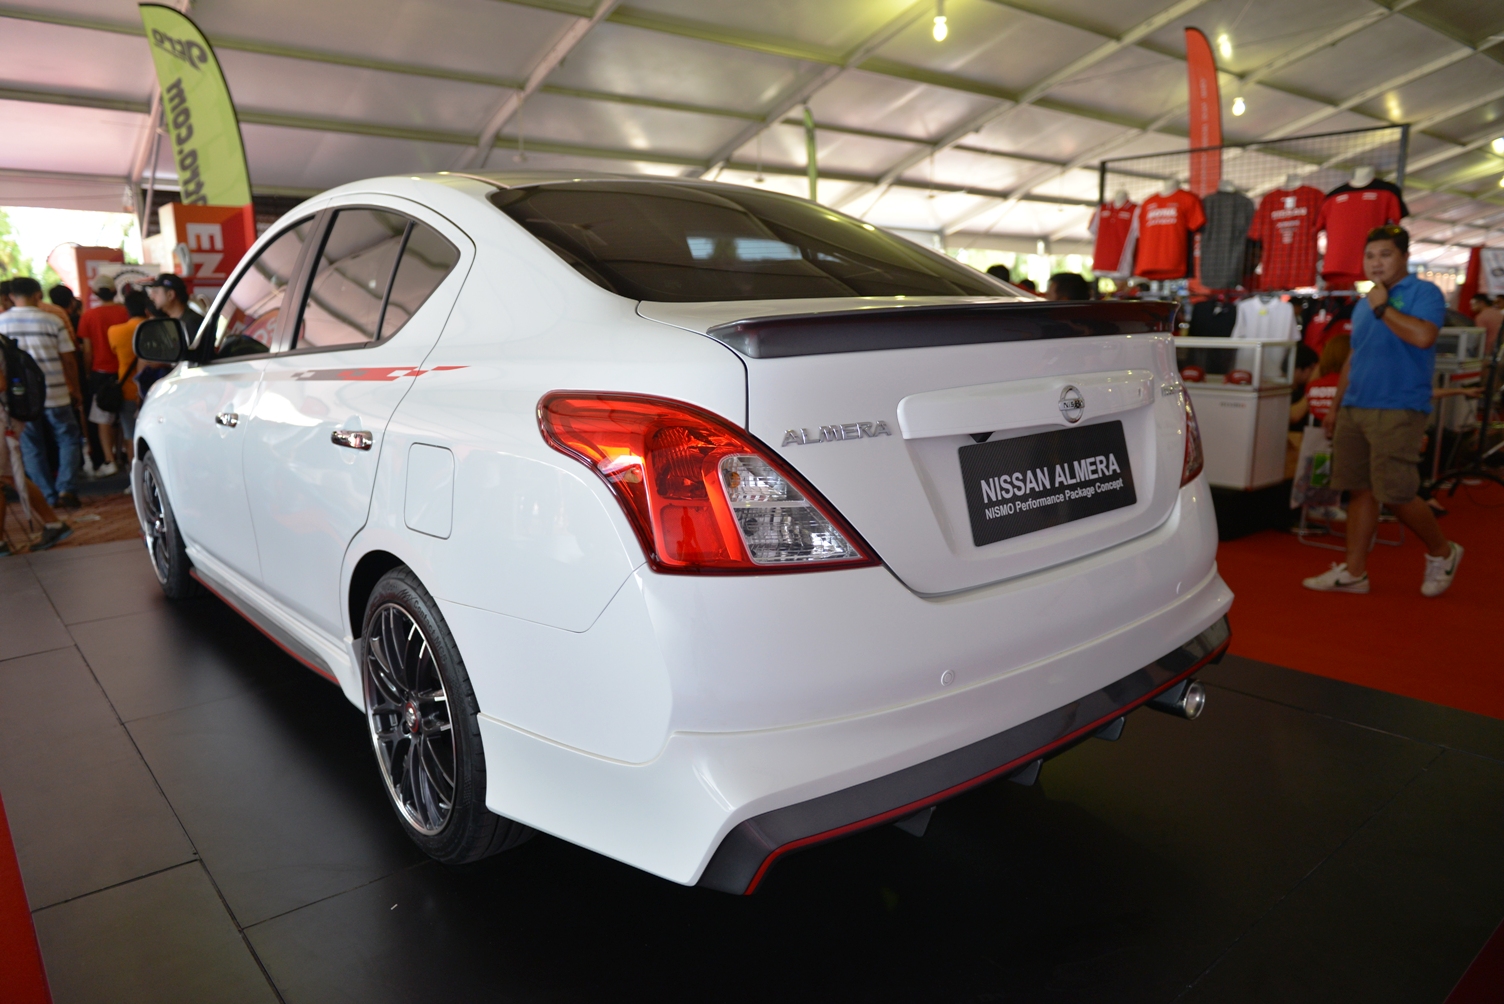 ASIAN AUTO DIGEST: Nissan Almera Nismo Performance Package 